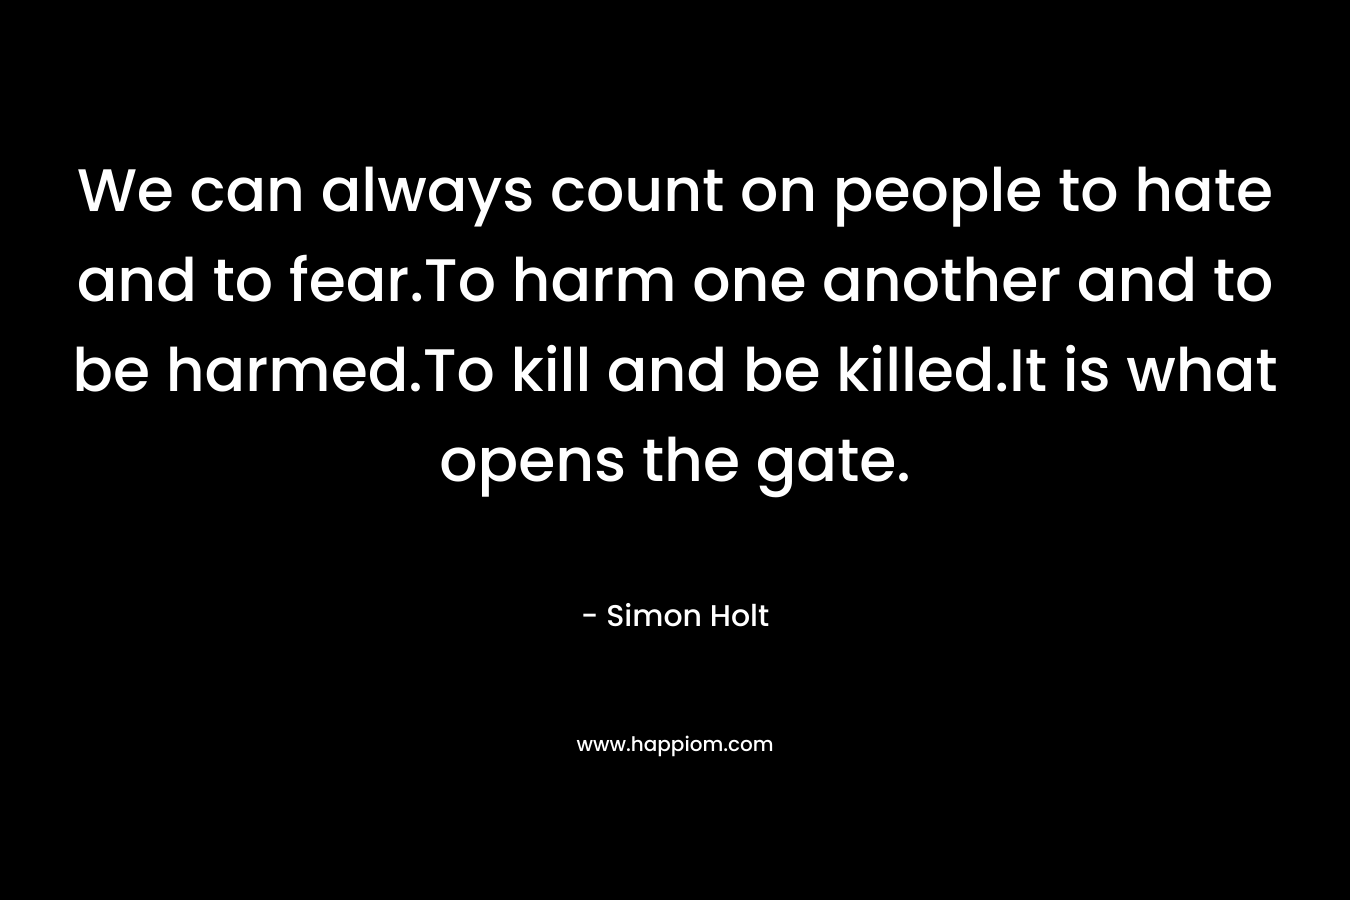 We can always count on people to hate and to fear.To harm one another and to be harmed.To kill and be killed.It is what opens the gate. – Simon Holt